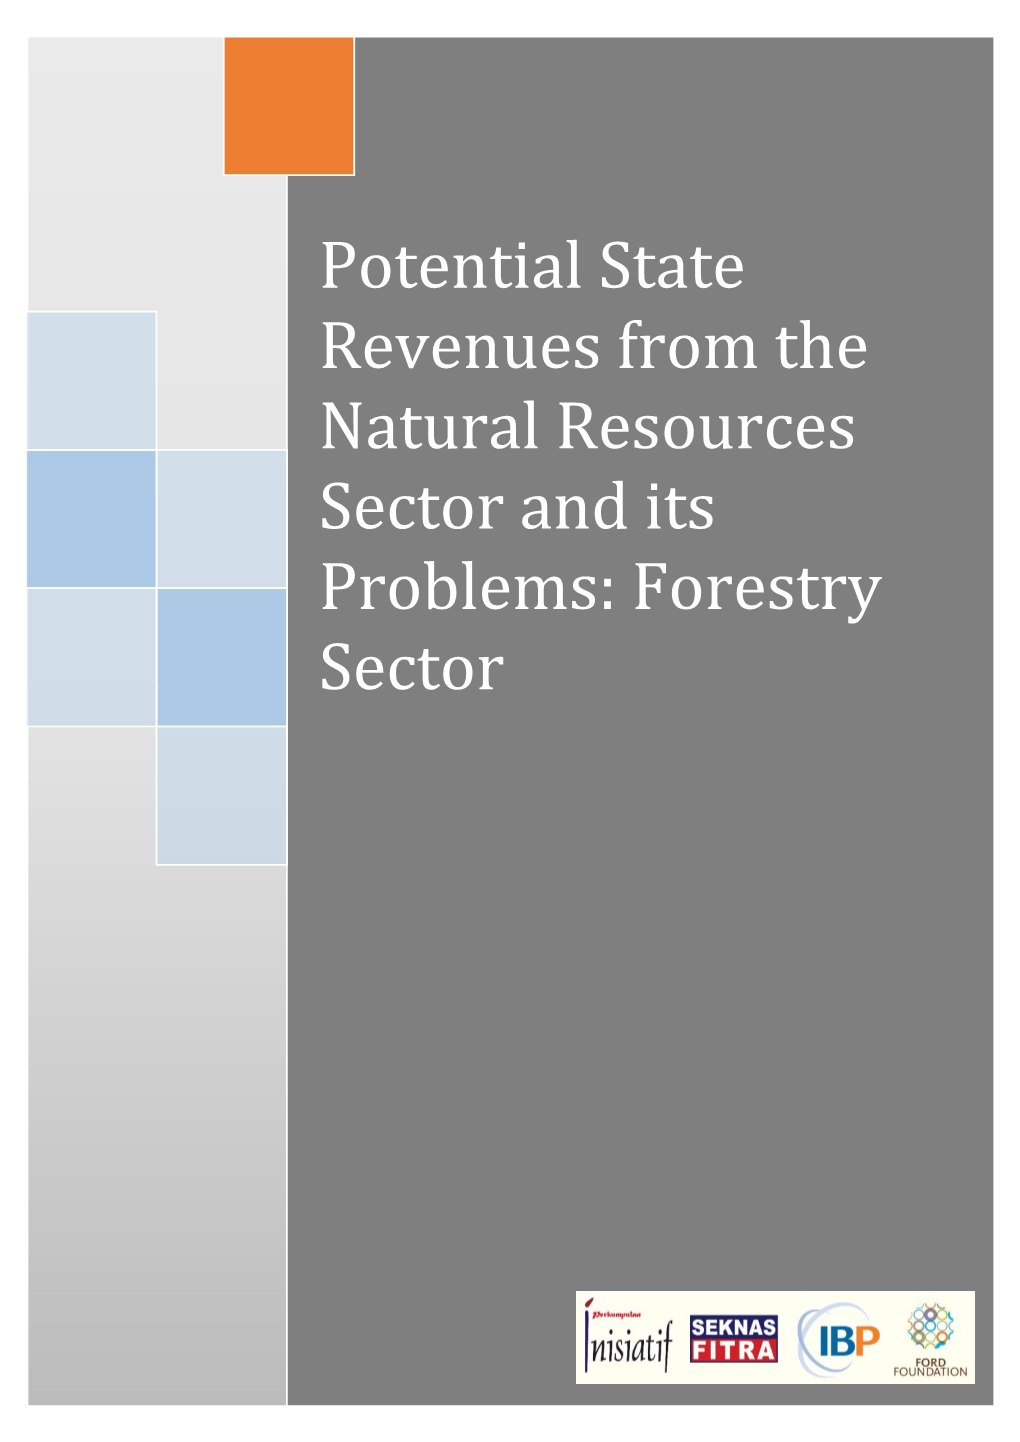 Potential State Revenues from the Natural Resources Sector and Its Problems: Forestry Sector